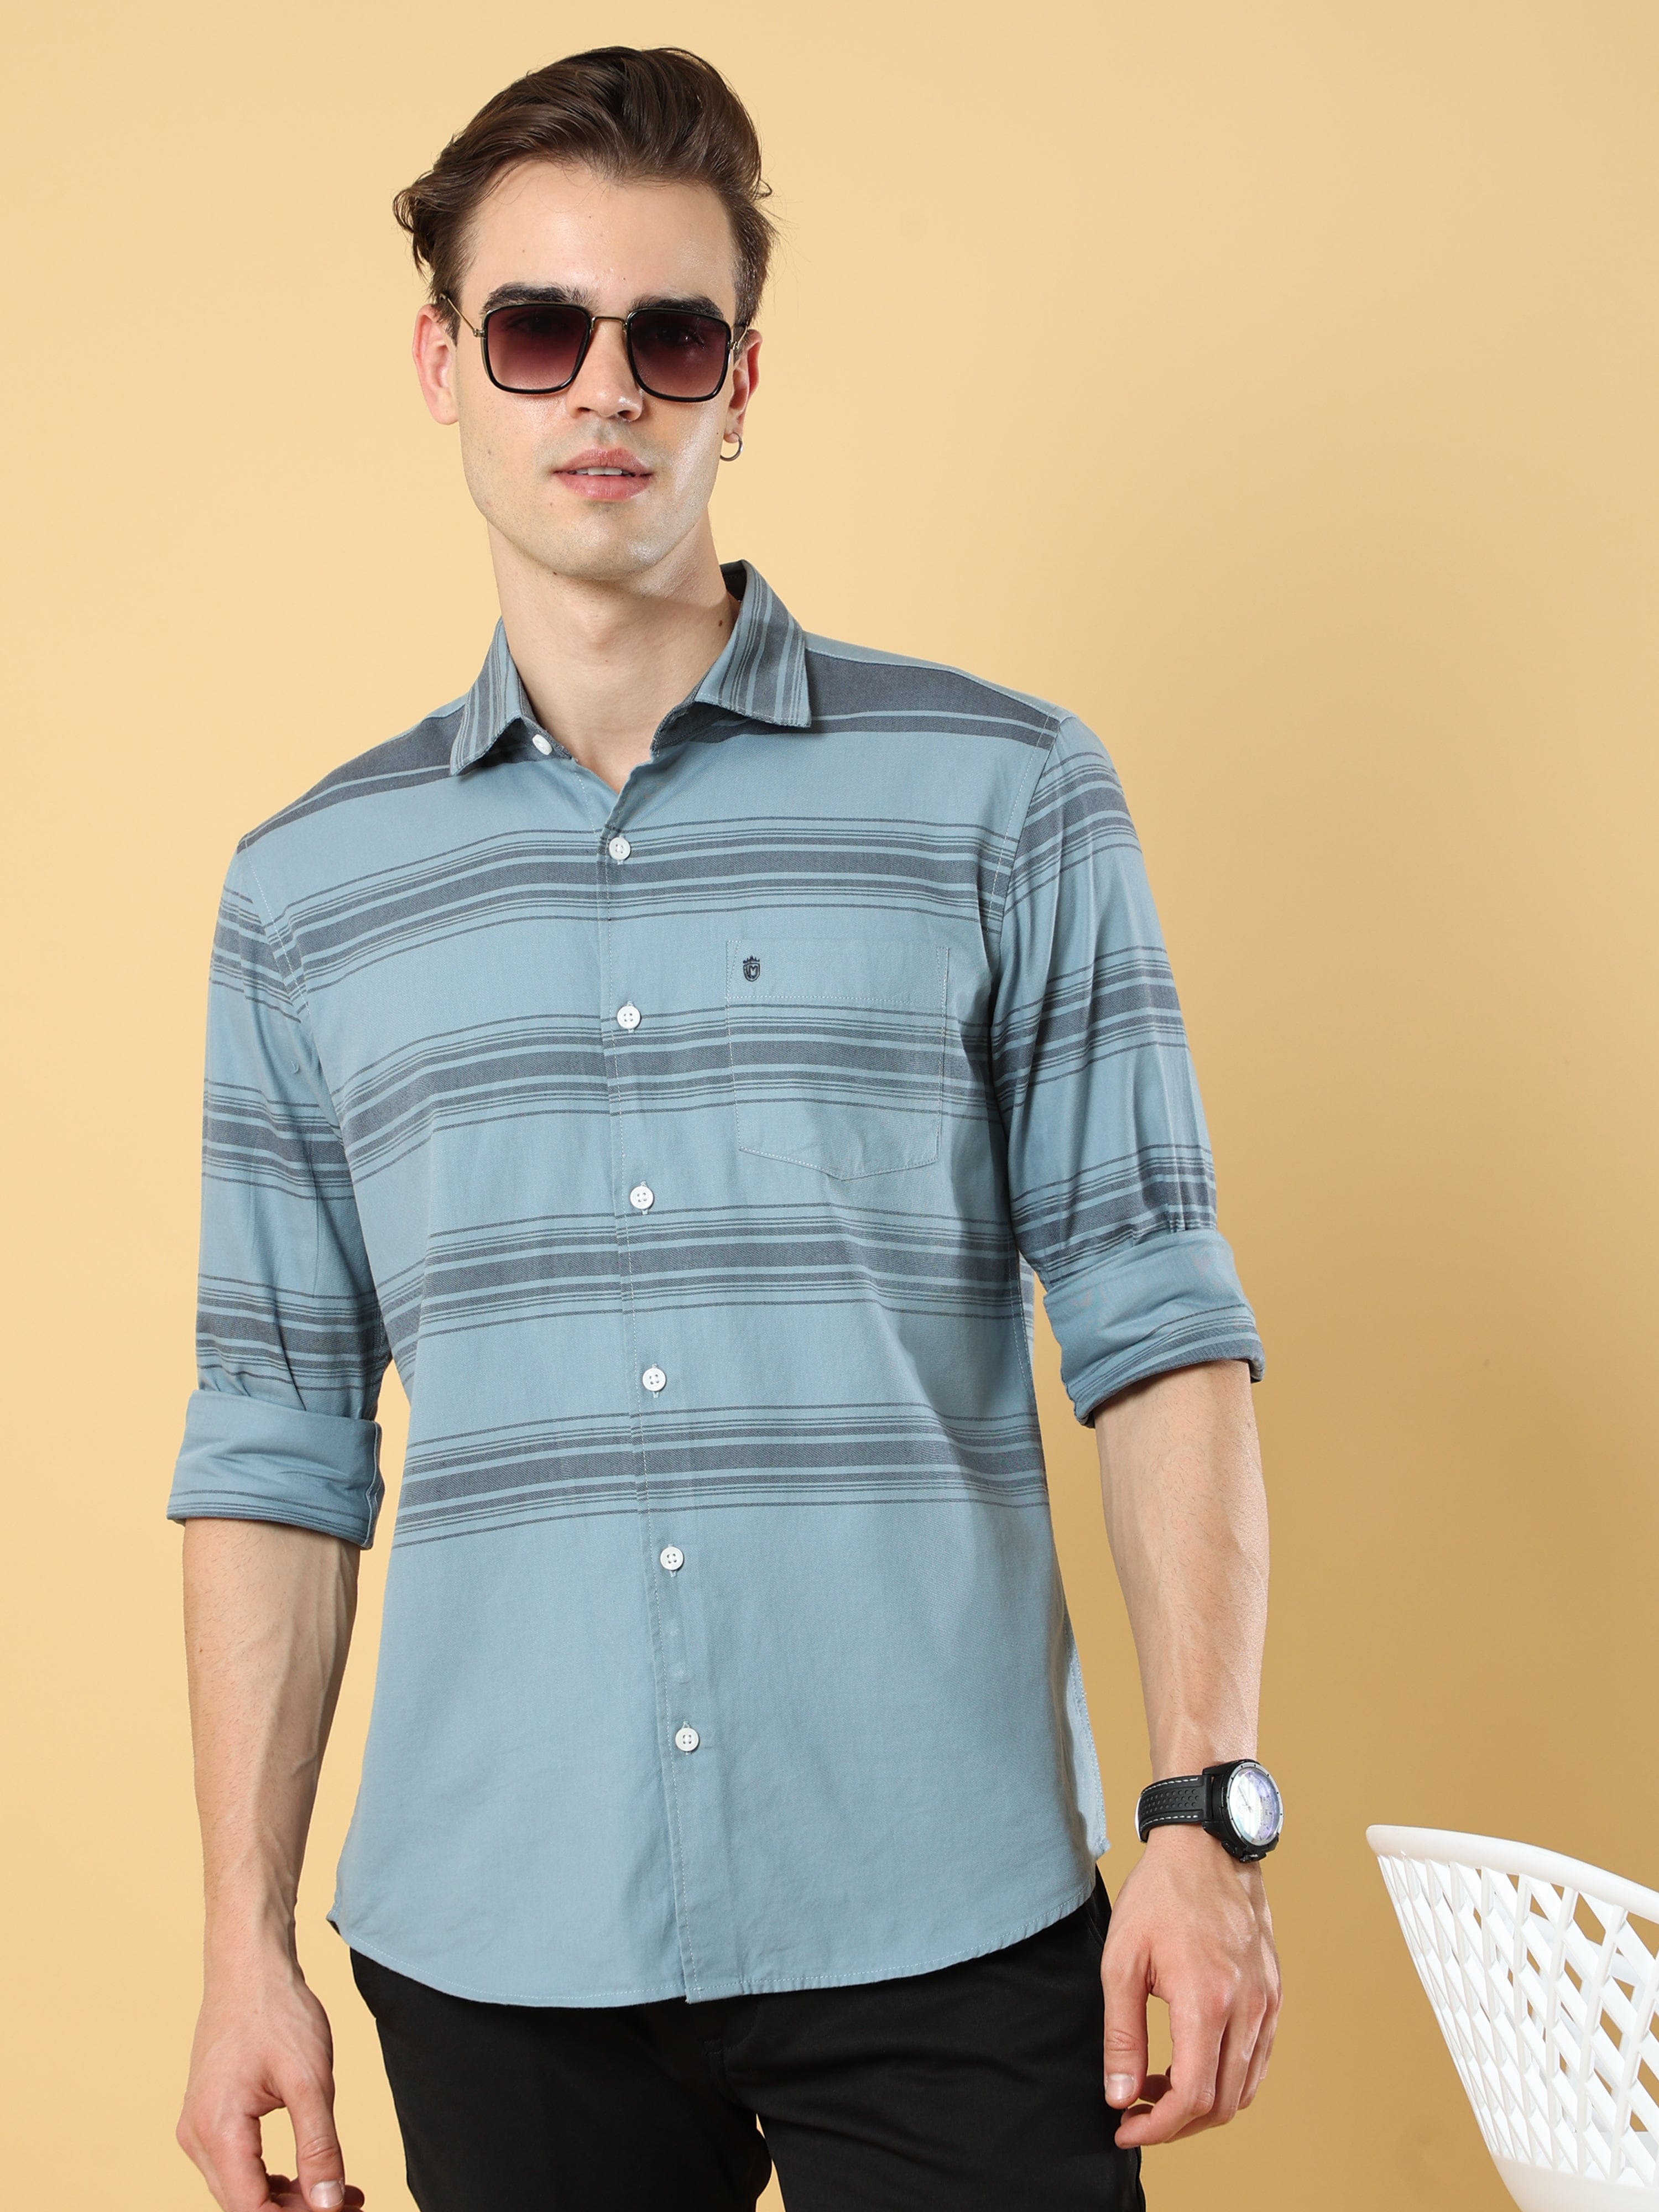 Shop Stylish Special Design Striped Shirt Men OnlineRs. 1006.00